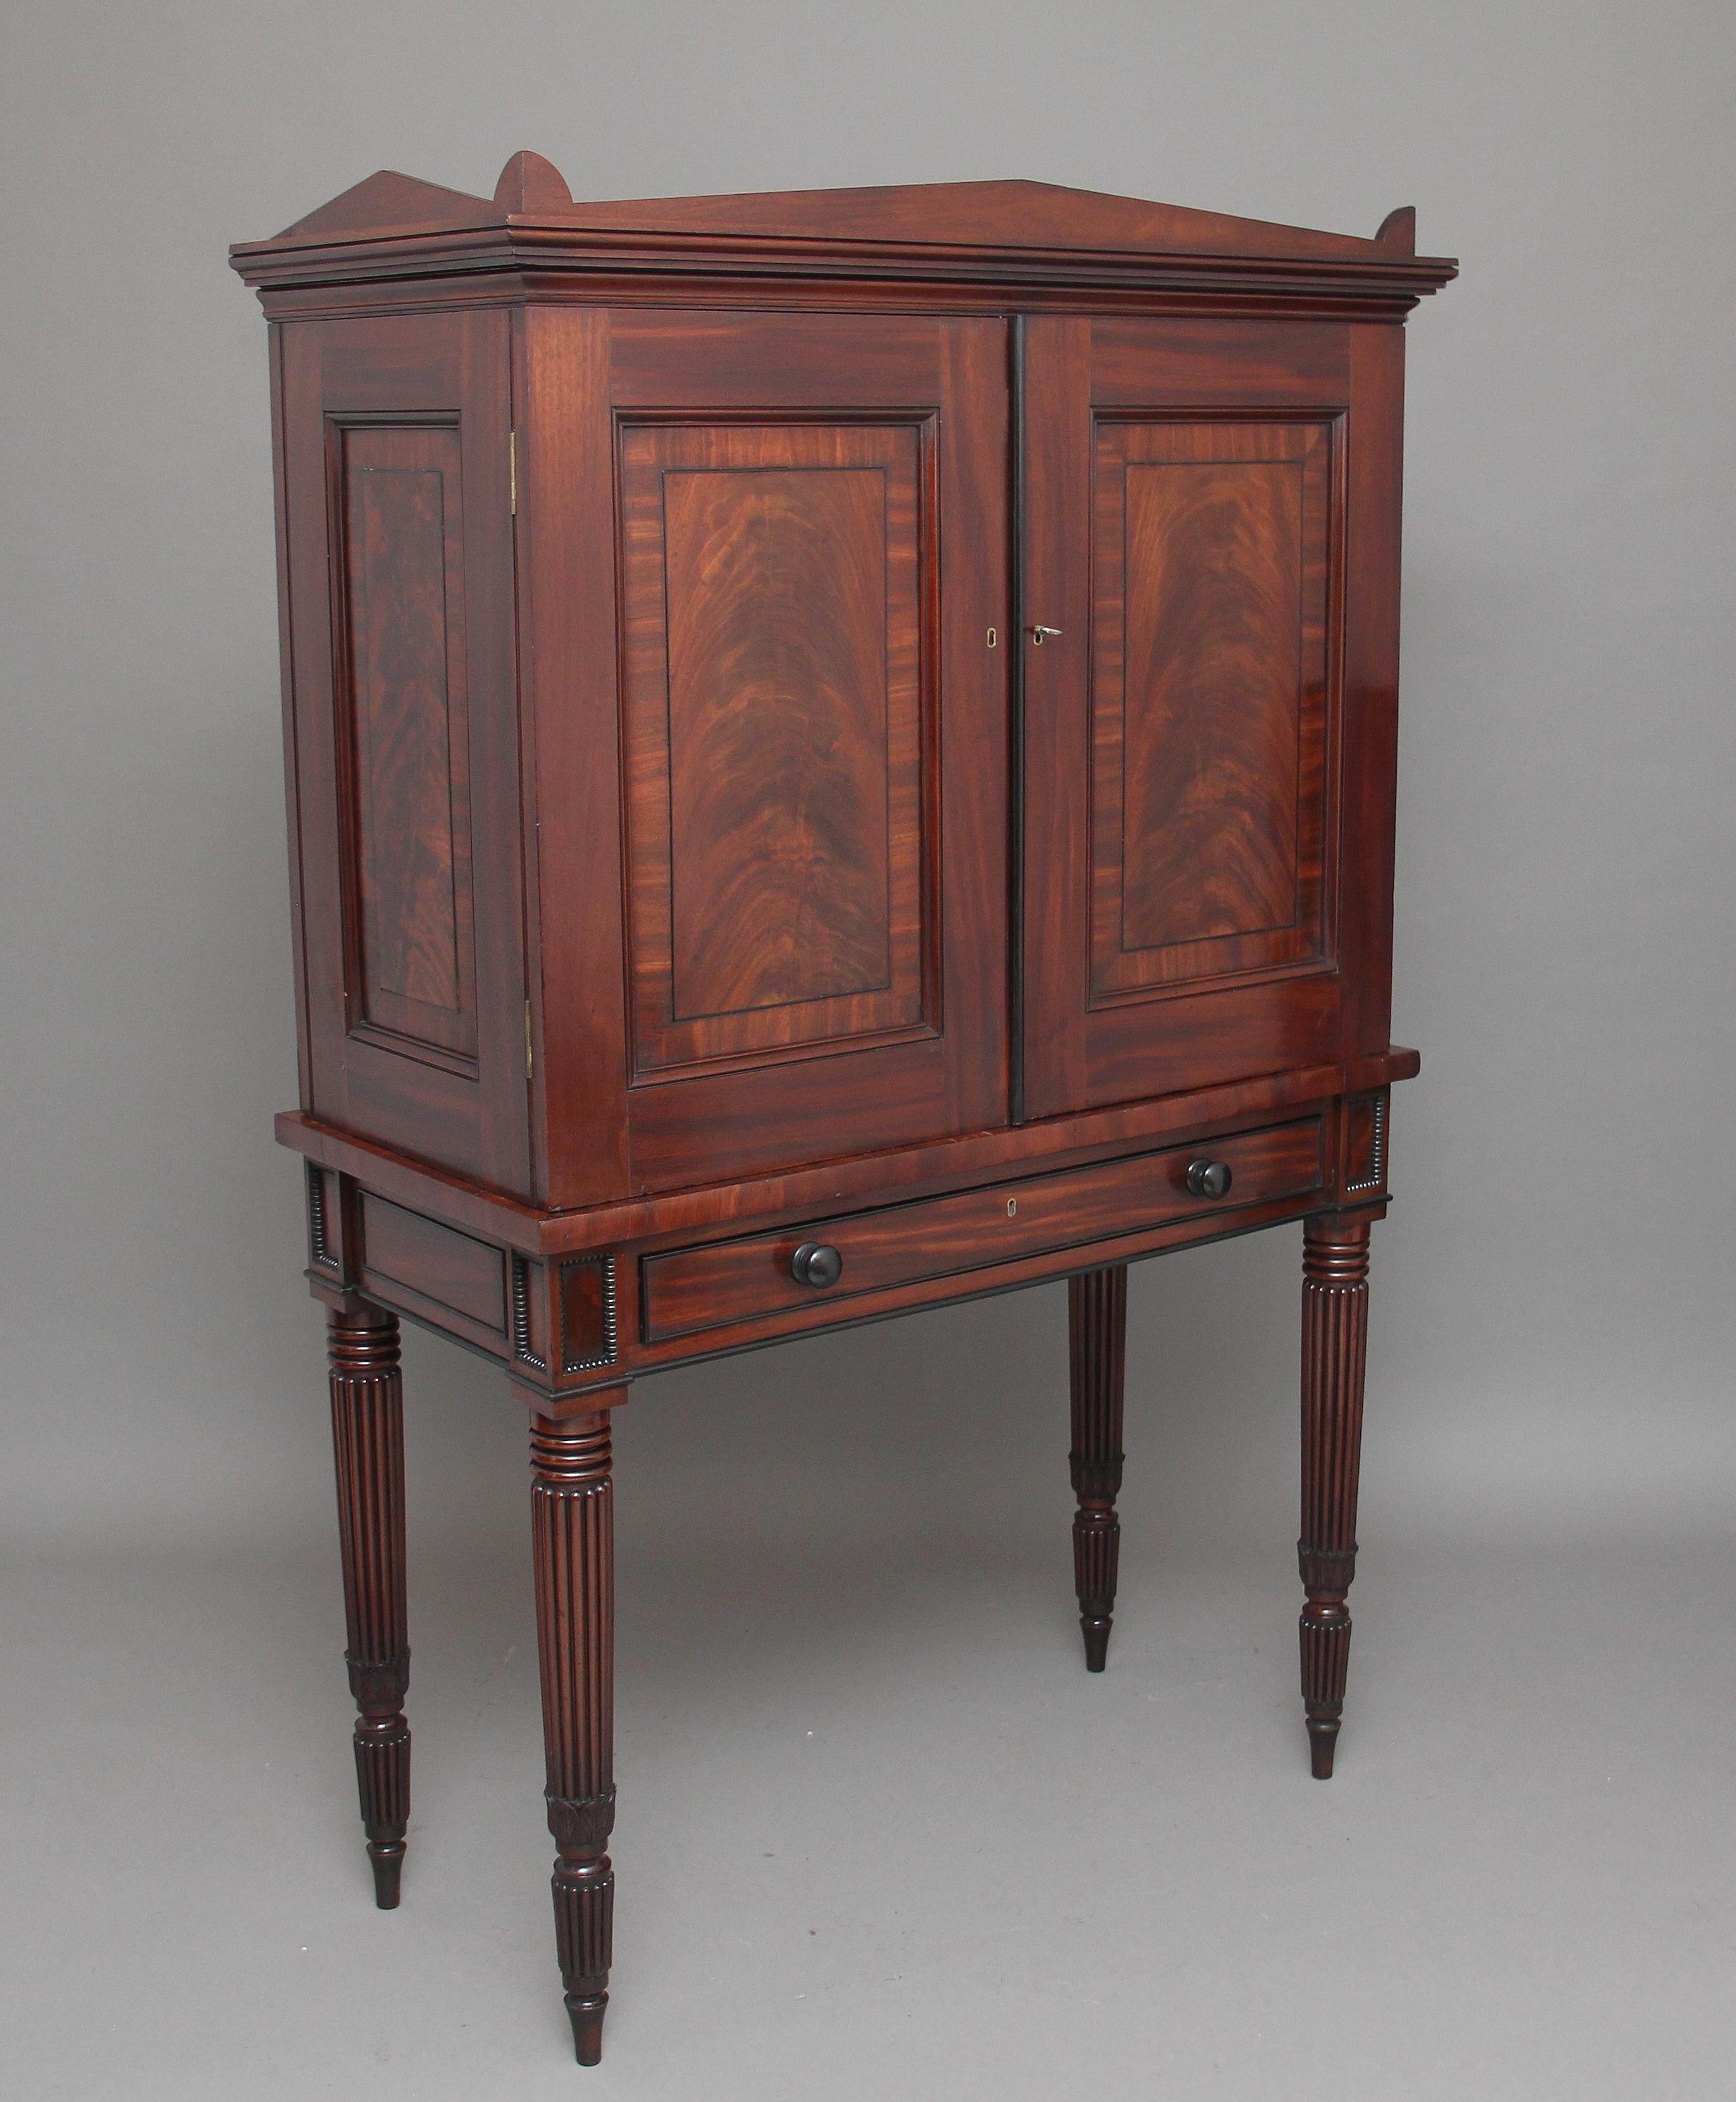 Early 19th Century Mahogany Collectors Cabinet In Good Condition For Sale In Martlesham, GB